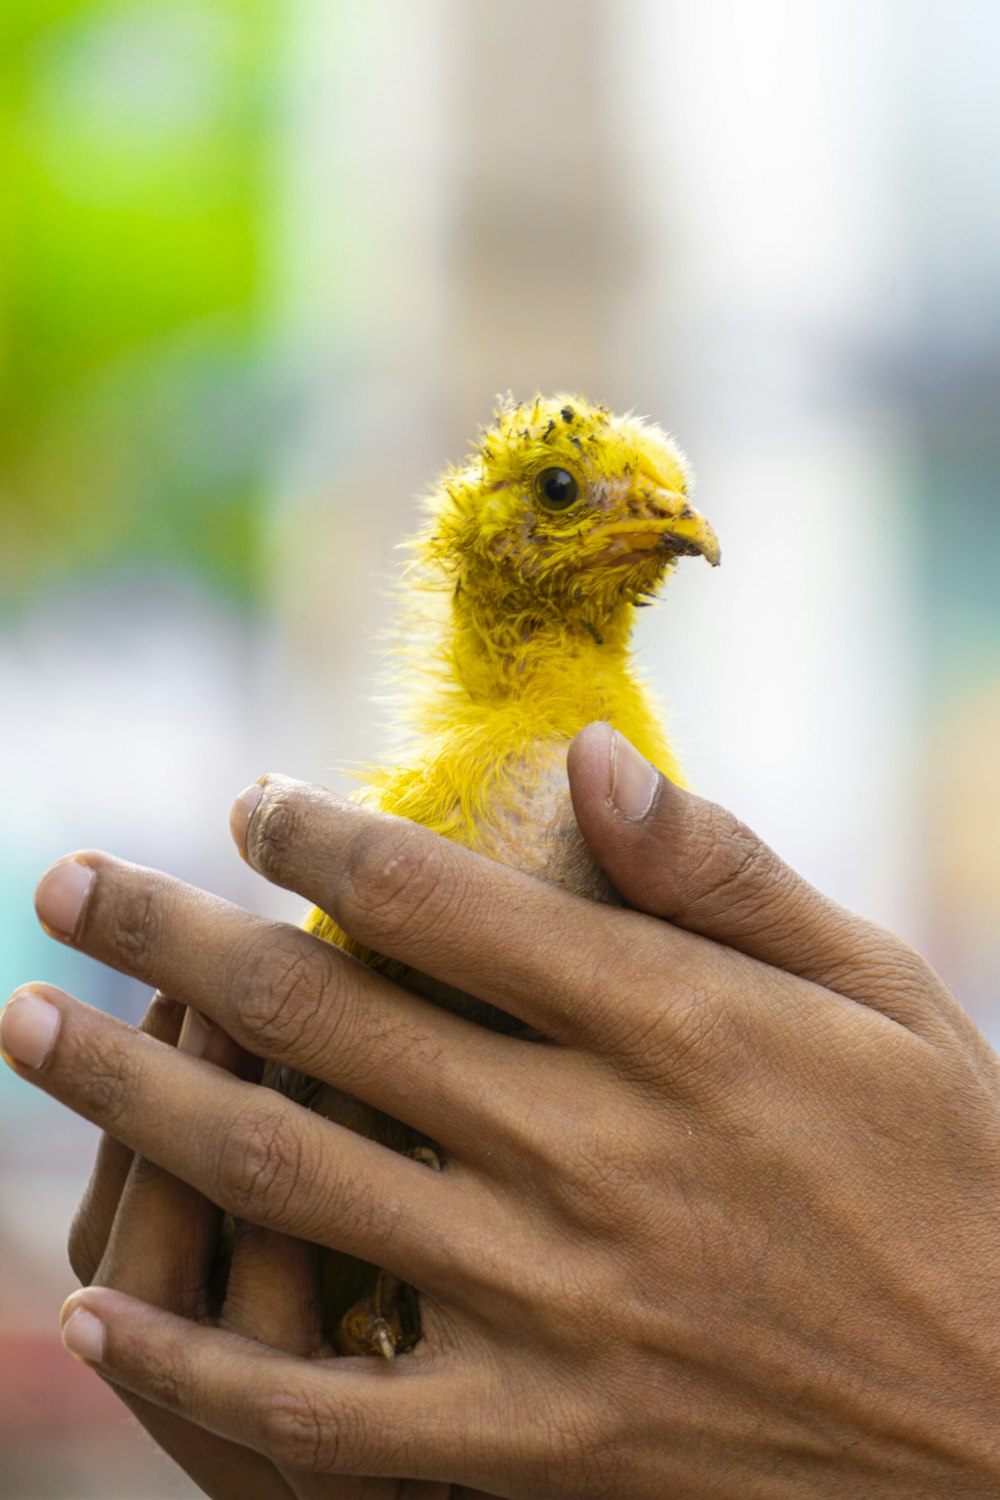 a person holding a small yellow bird in their hand